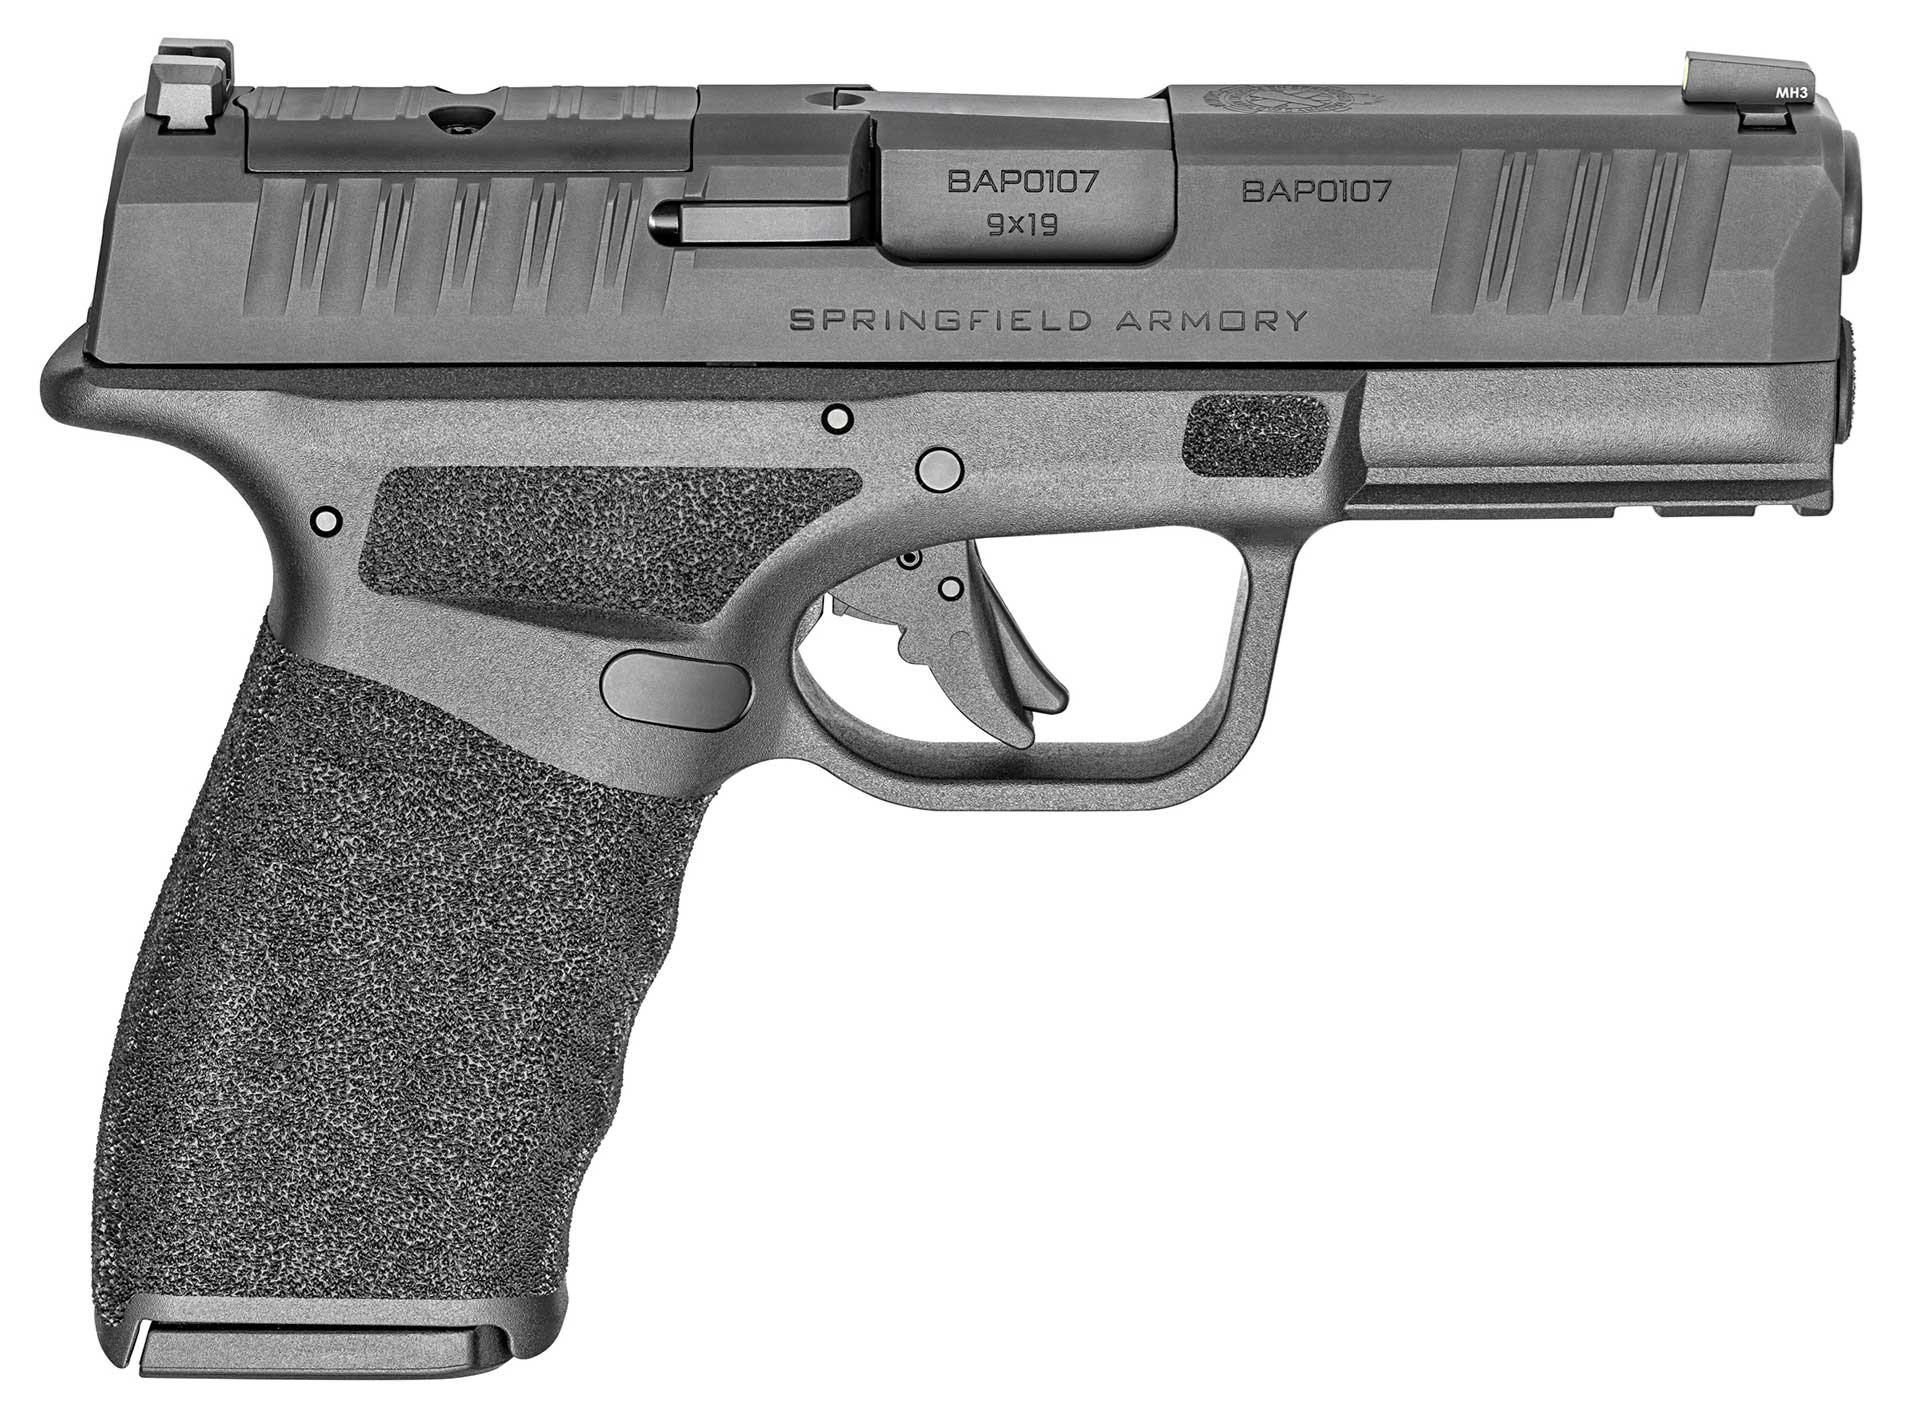 Springfield Armory Hellcat Pro shown, right side, on white.